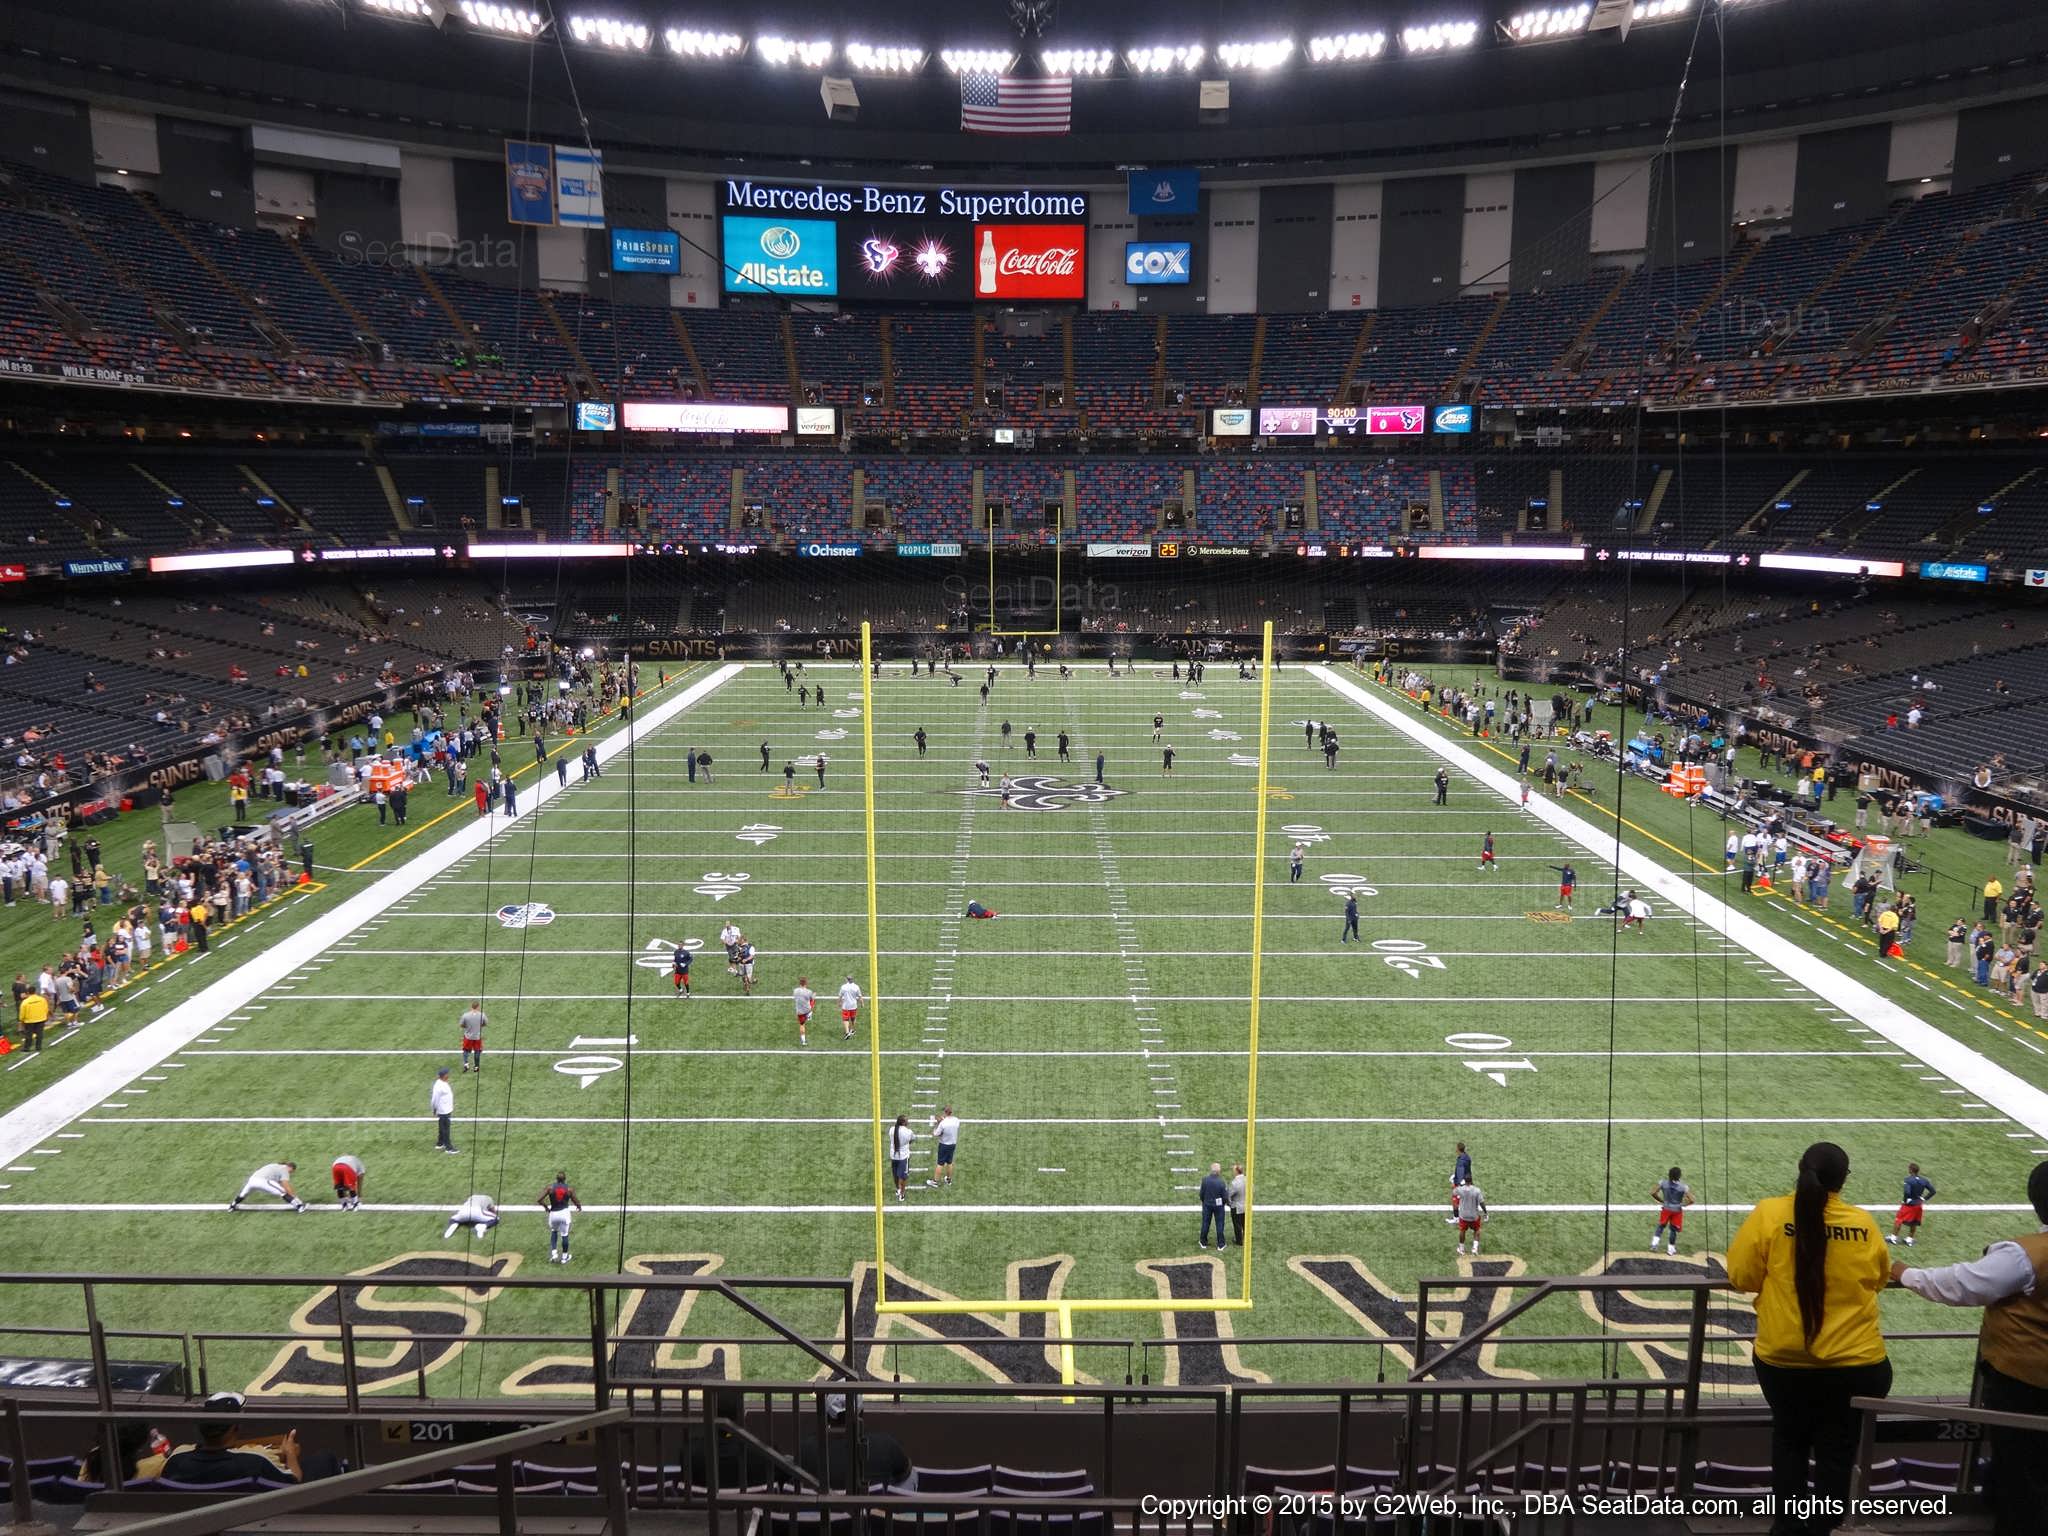 Seat view from section 348 at the Mercedes-Benz Superdome, home of the New Orleans Saints